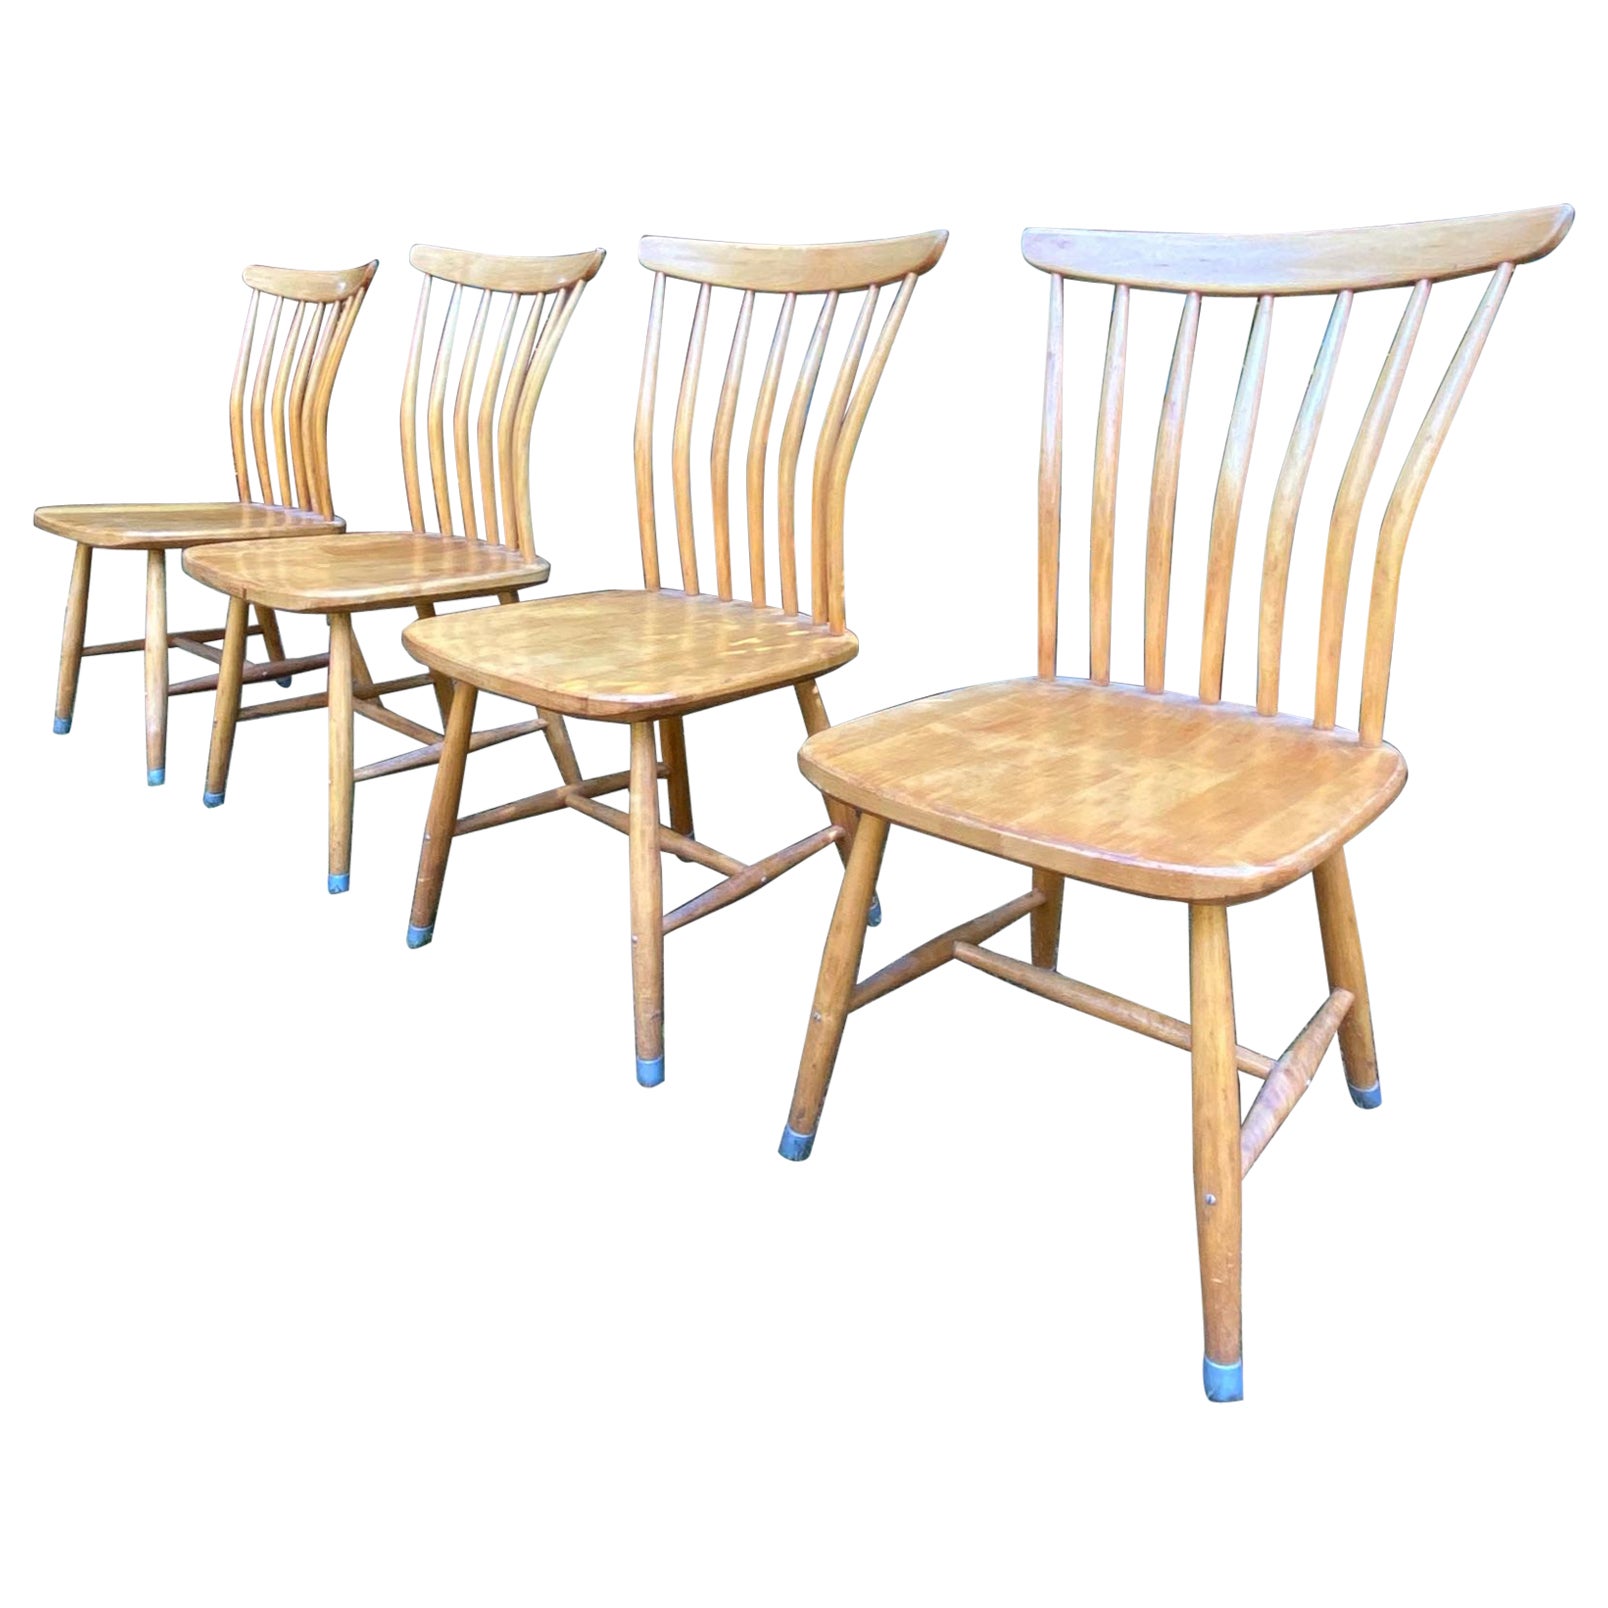 Set of Four Akerblom Dining Room Chairs by Bengt Aker Blom and Gunnar Eklöf For Sale